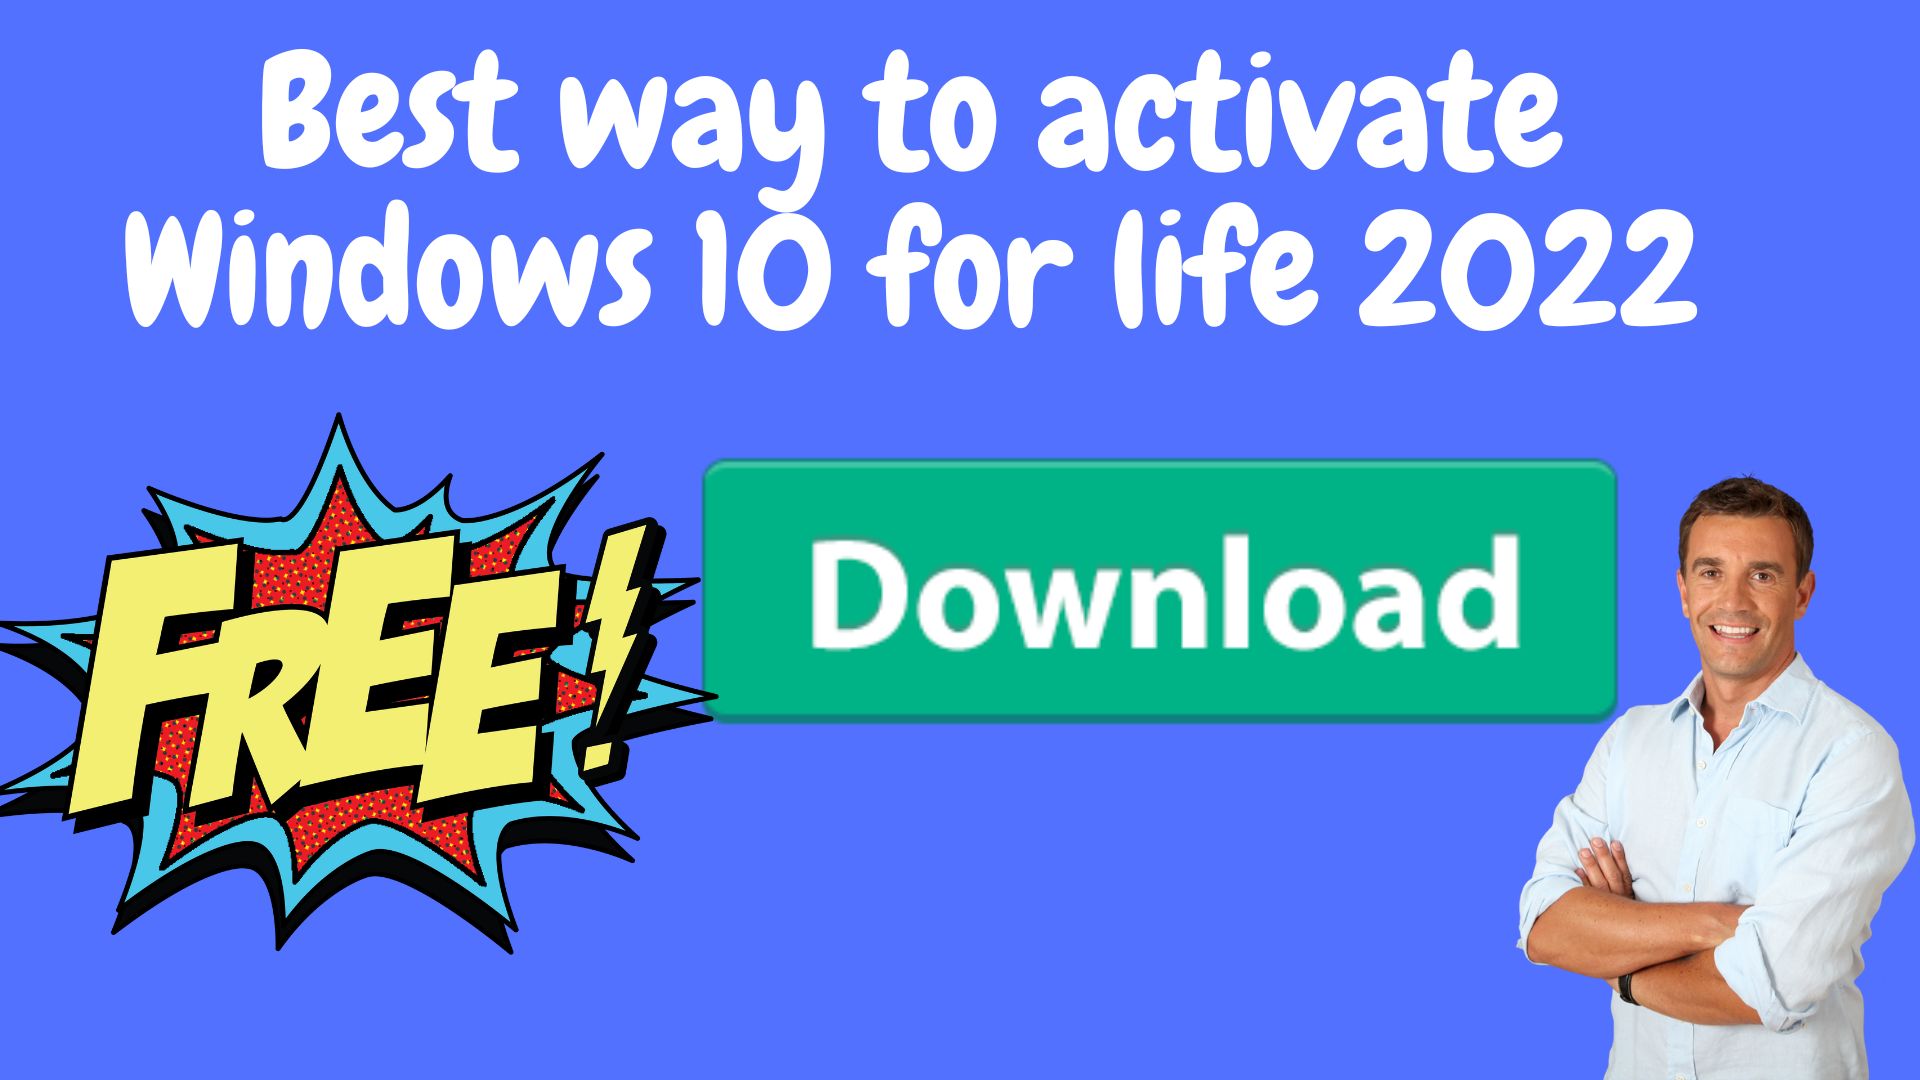 Best way to activate windows 10 for life 2022